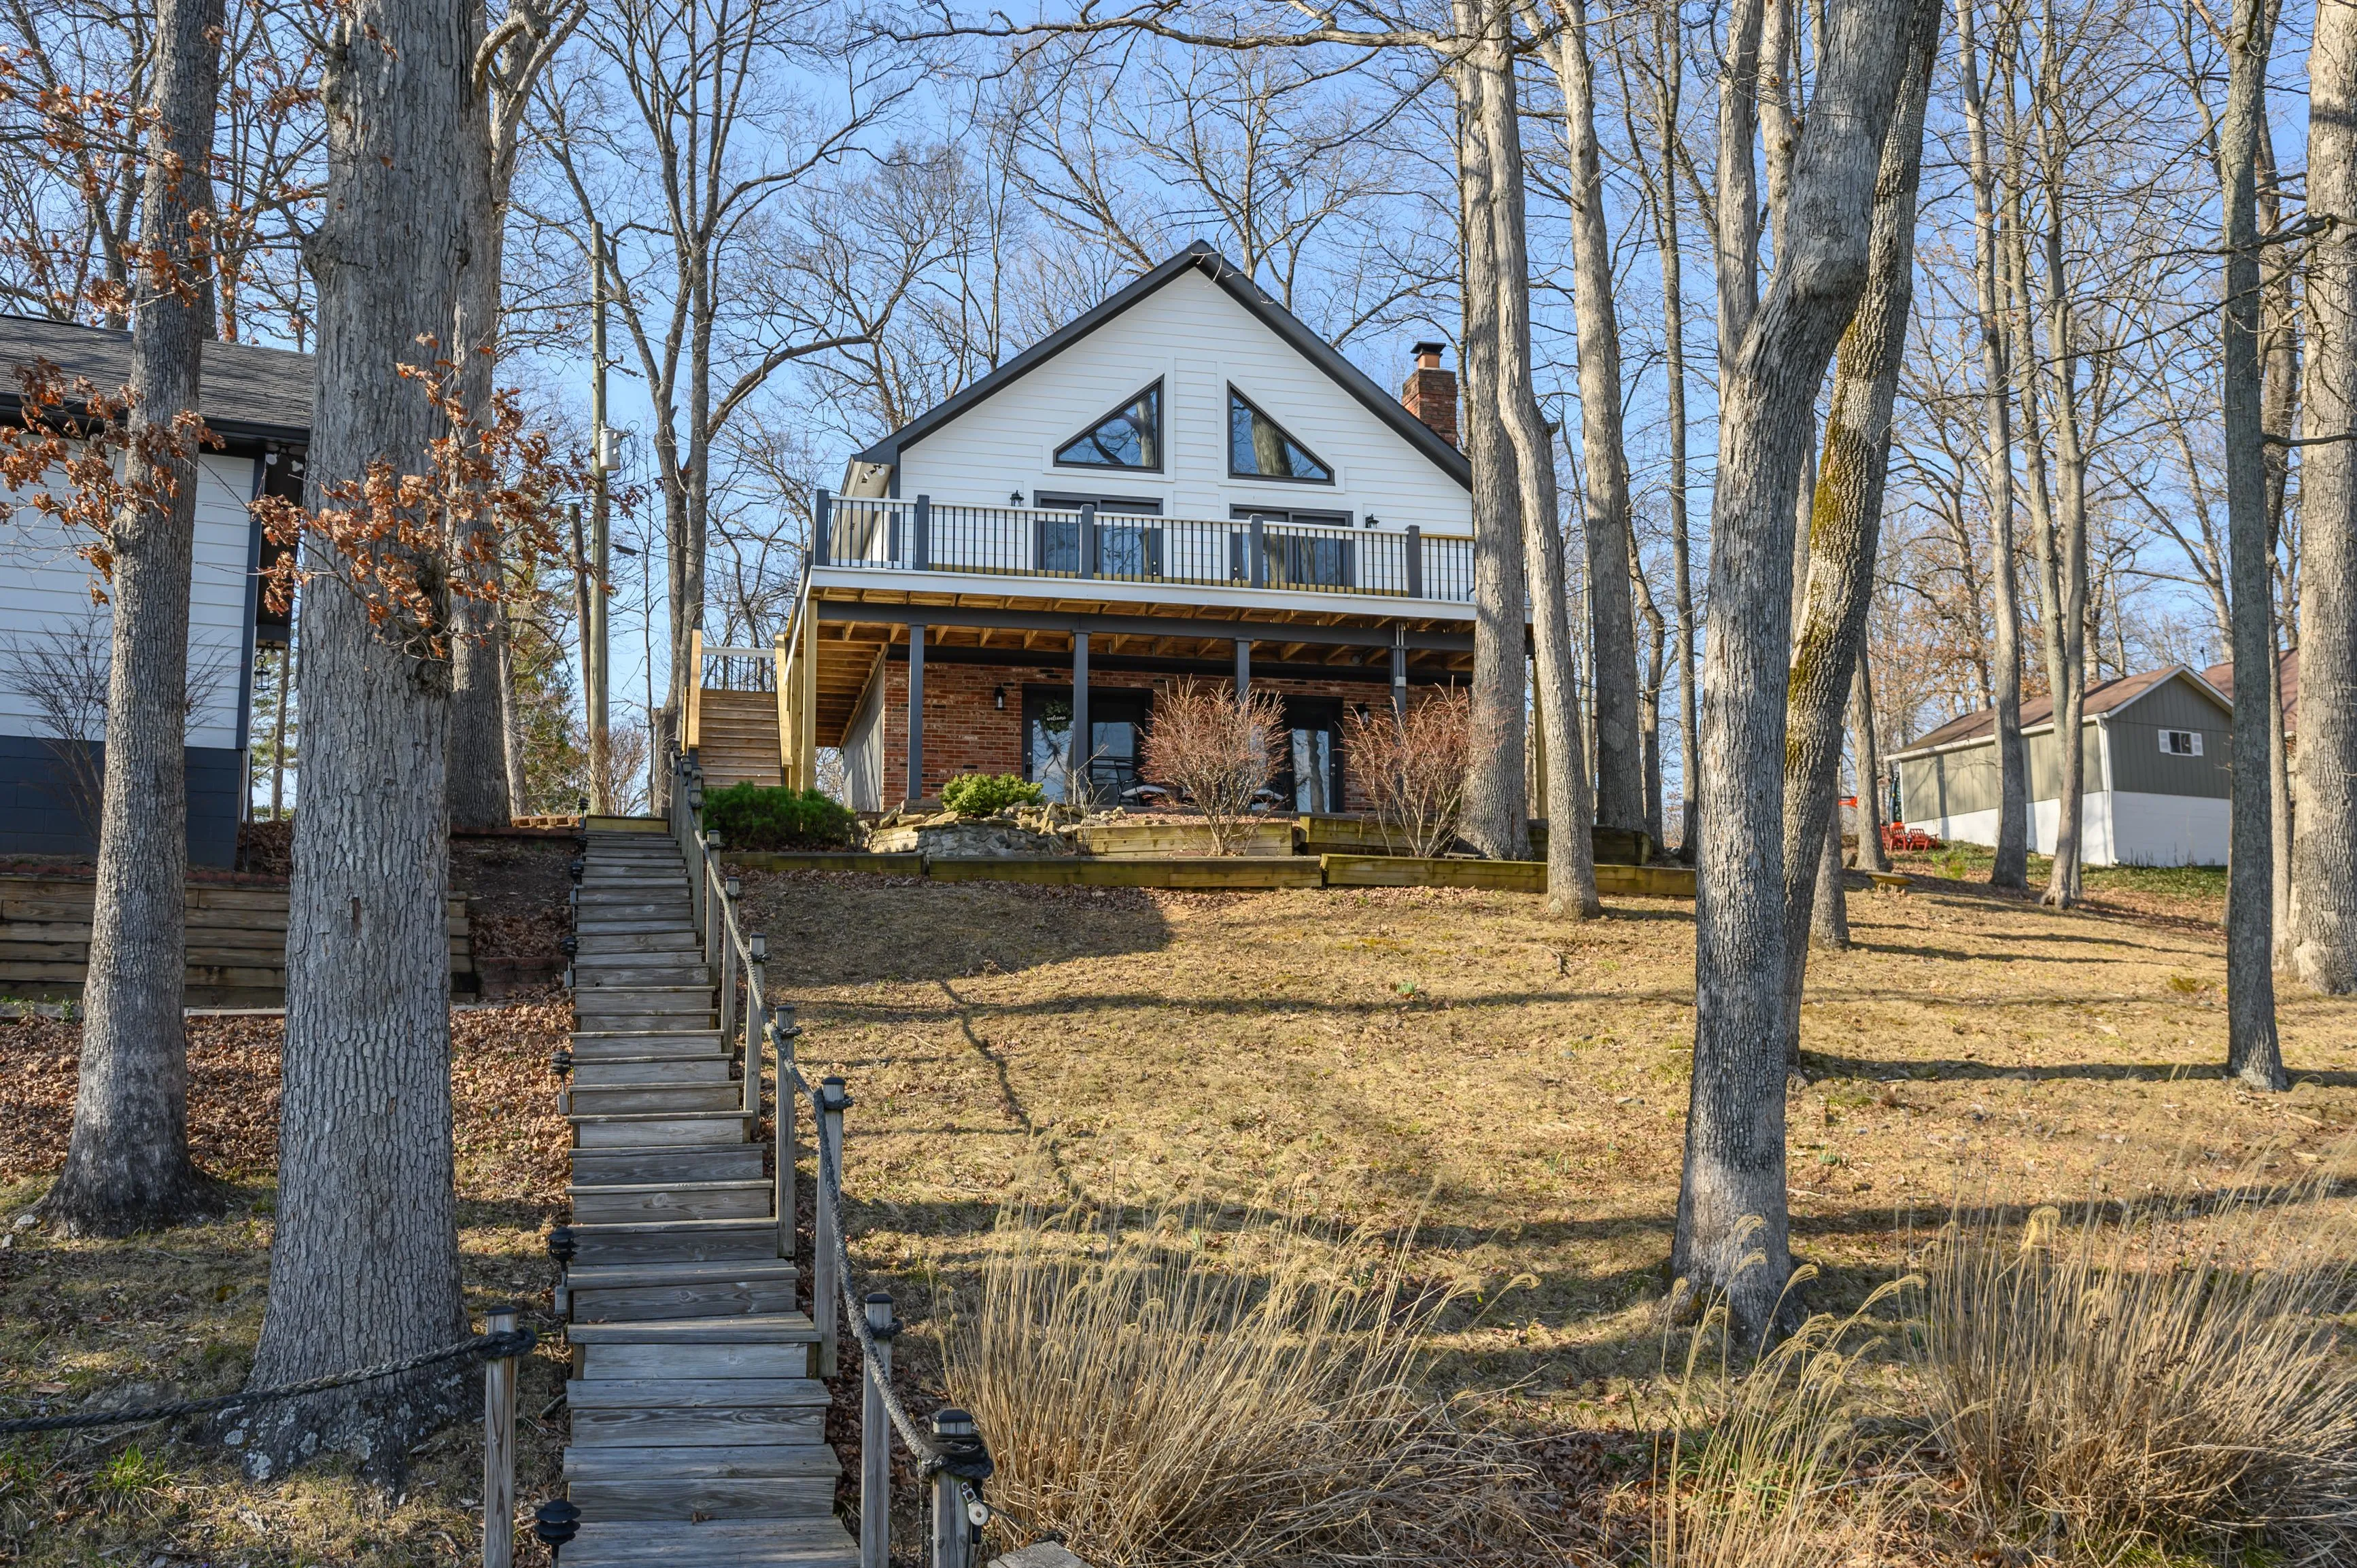 A two-story house with a brick foundation and white siding, featuring a large front porch, set back from a leafless tree-lined yard with a central staircase leading to the front door.